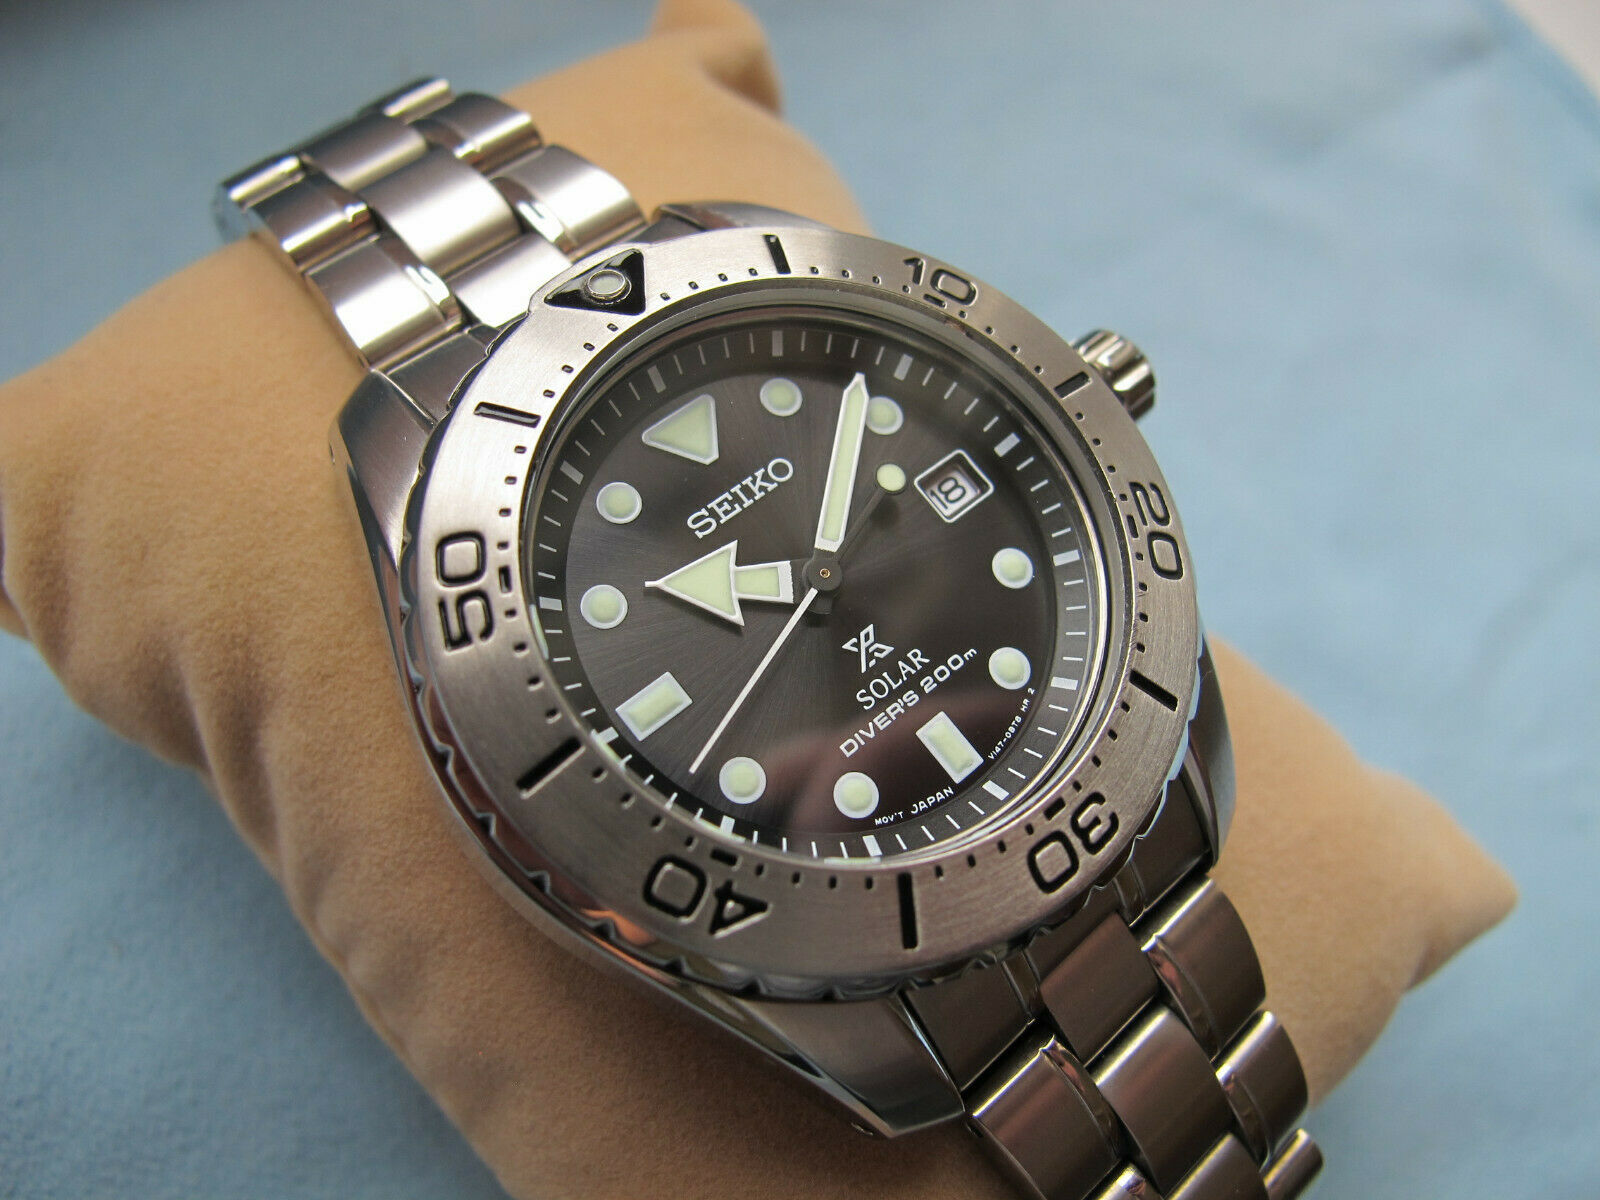 Seiko SBDN015 midsize Solar Ti Diver's watch w/ boxes, manuals, hangtags,  links | WatchCharts